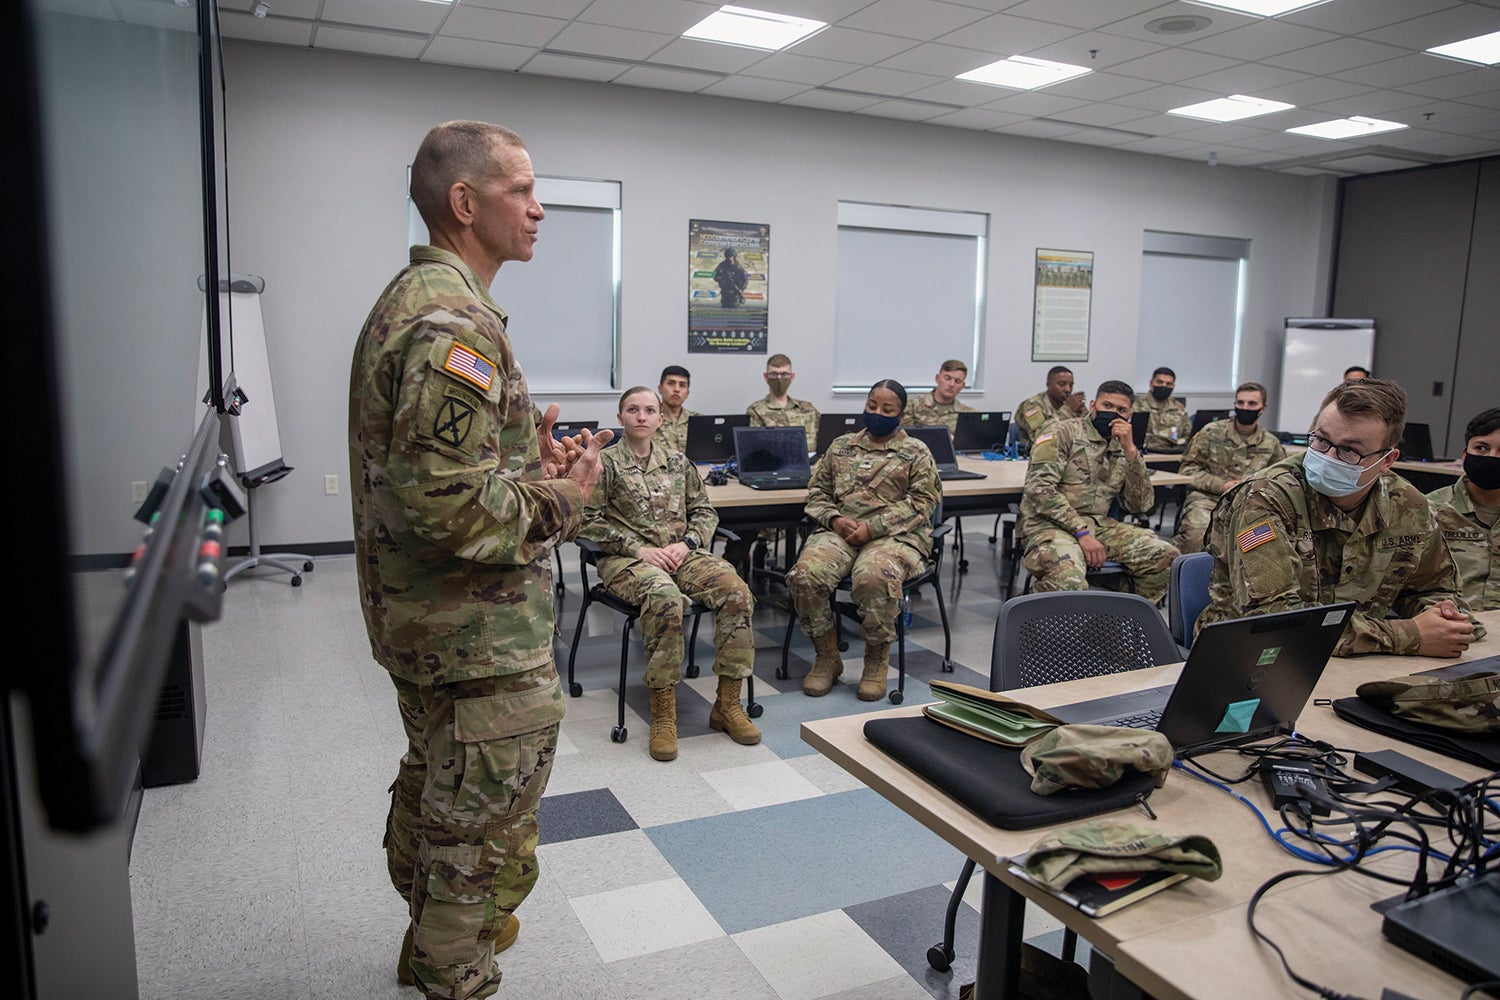 Grinston addresses soldiers at the NCO Academy at Fort Drum, New York. (Credit: U.S. Army/Spc. Josue Patricio)